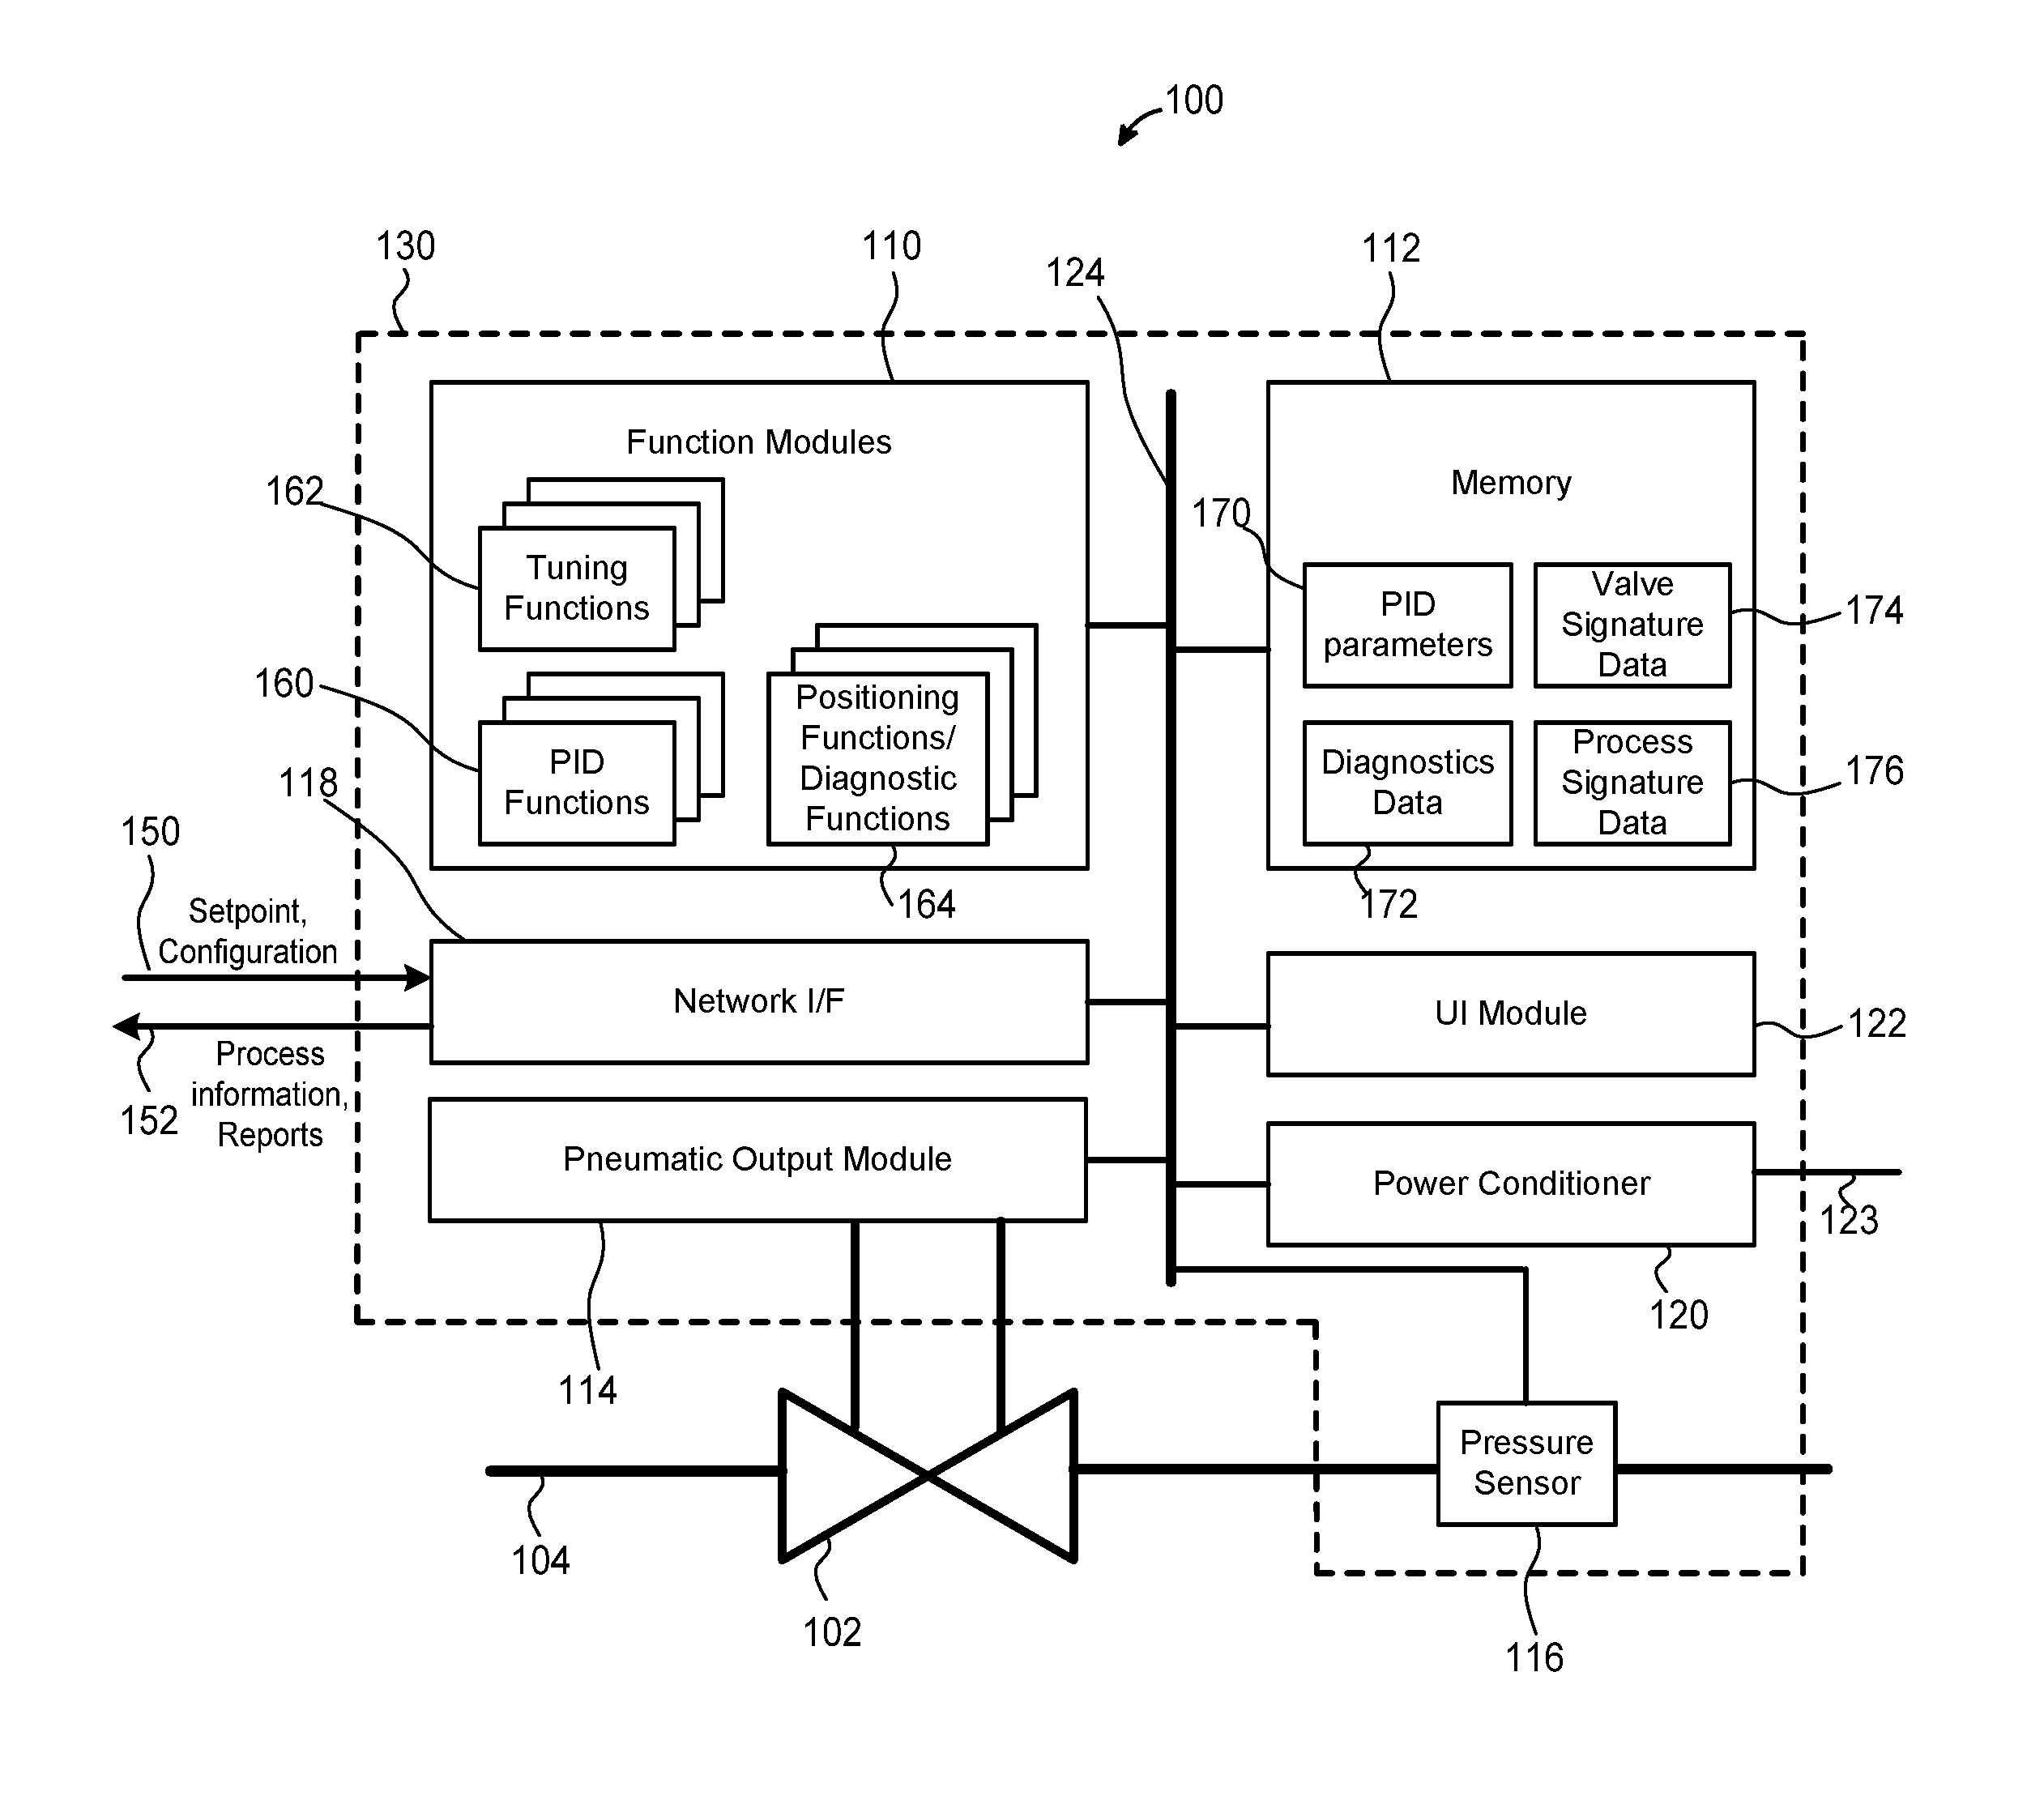 Integrated process controller with loop and valve control capability